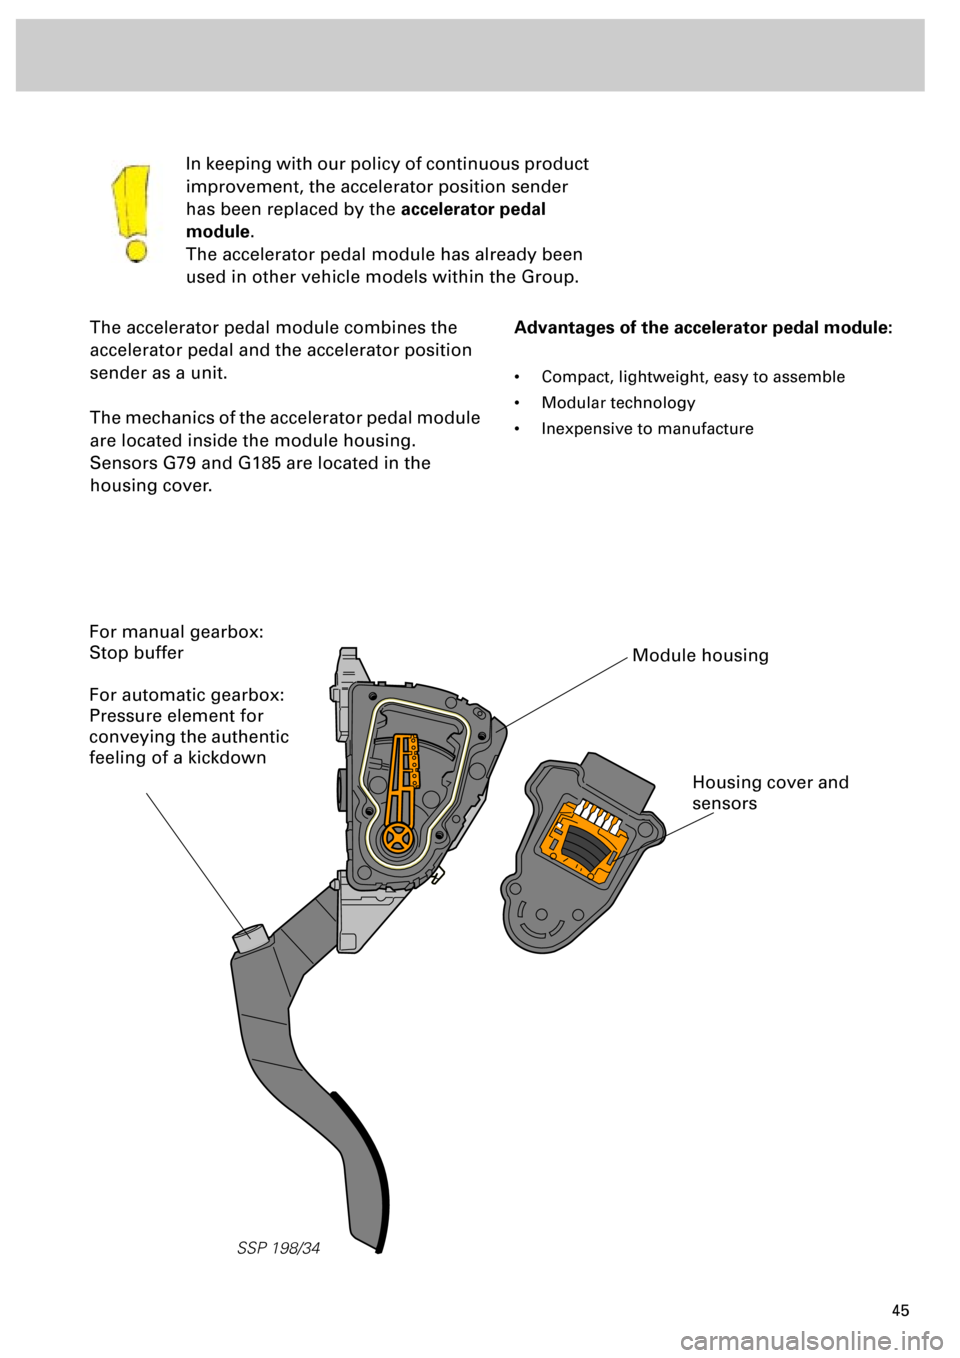 AUDI S4 1998 B5 / 1.G Engine Manual  
45 
SSP 198/34
 
The accelerator pedal module combines the 
accelerator pedal and the accelerator position 
sender as a unit.
The mechanics of the accelerator pedal module 
are located inside the mo